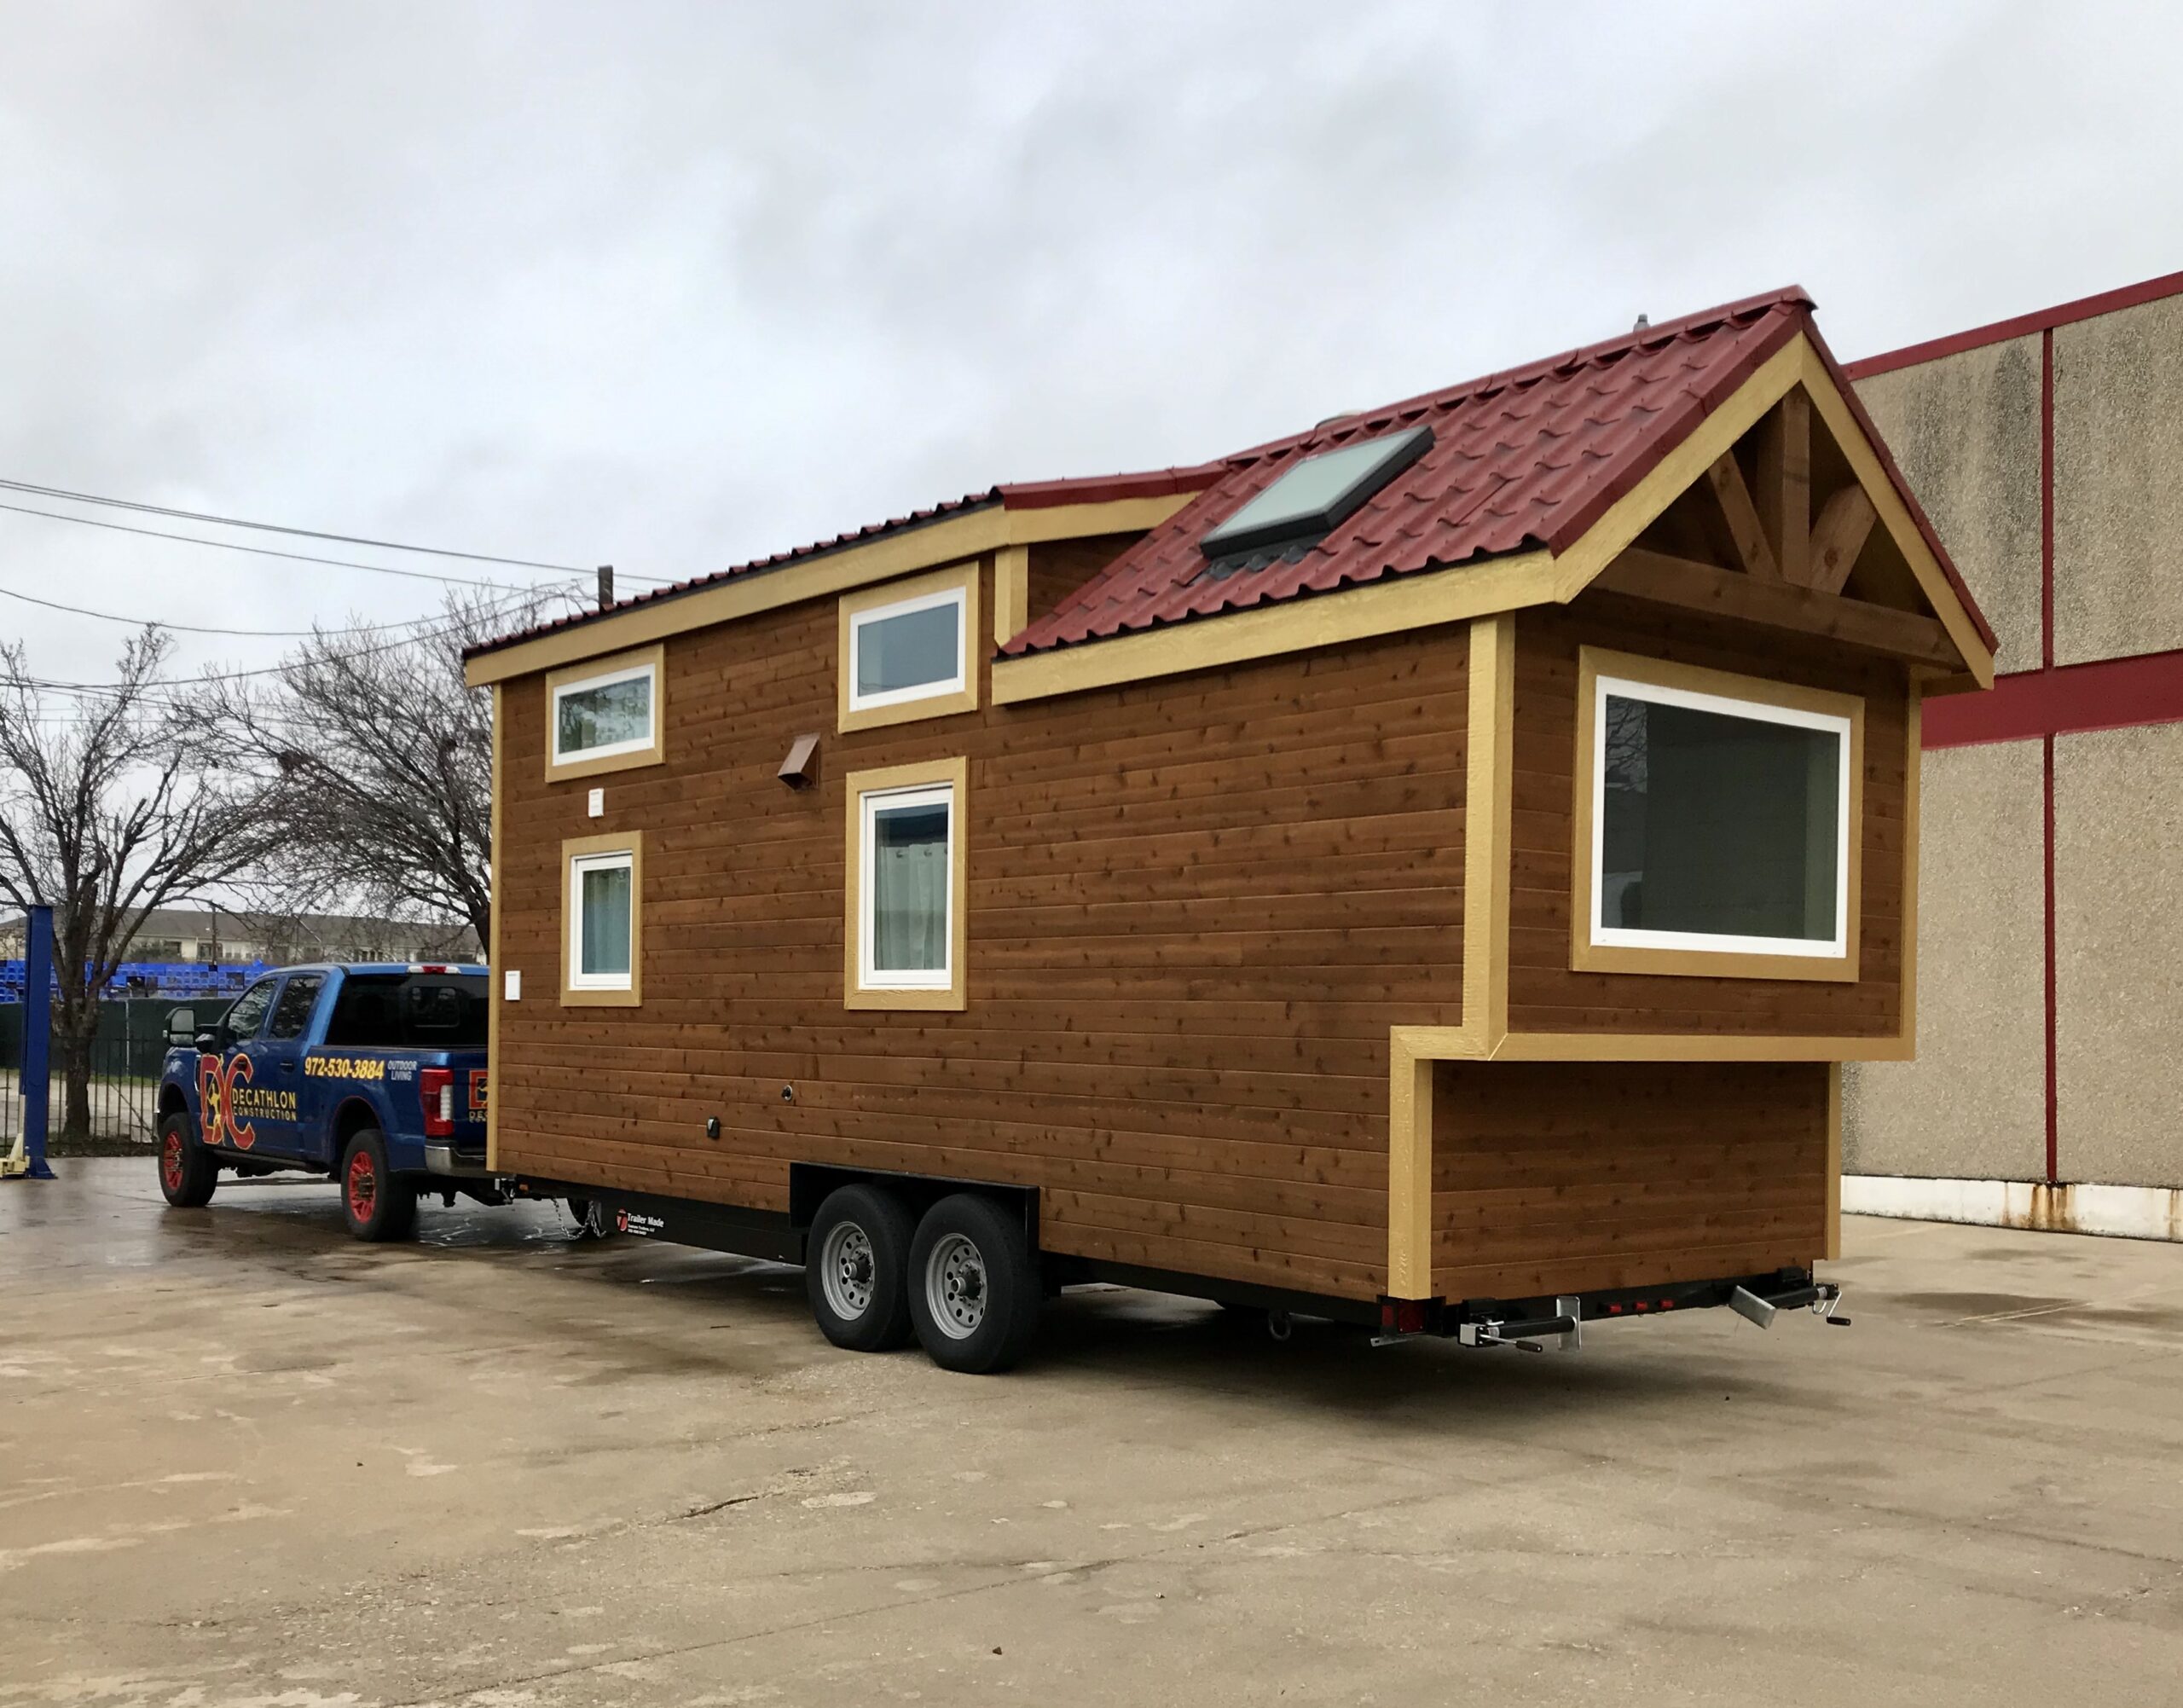 The Environmental Benefits of Tiny Homes Sustainable Living on a Small Scale